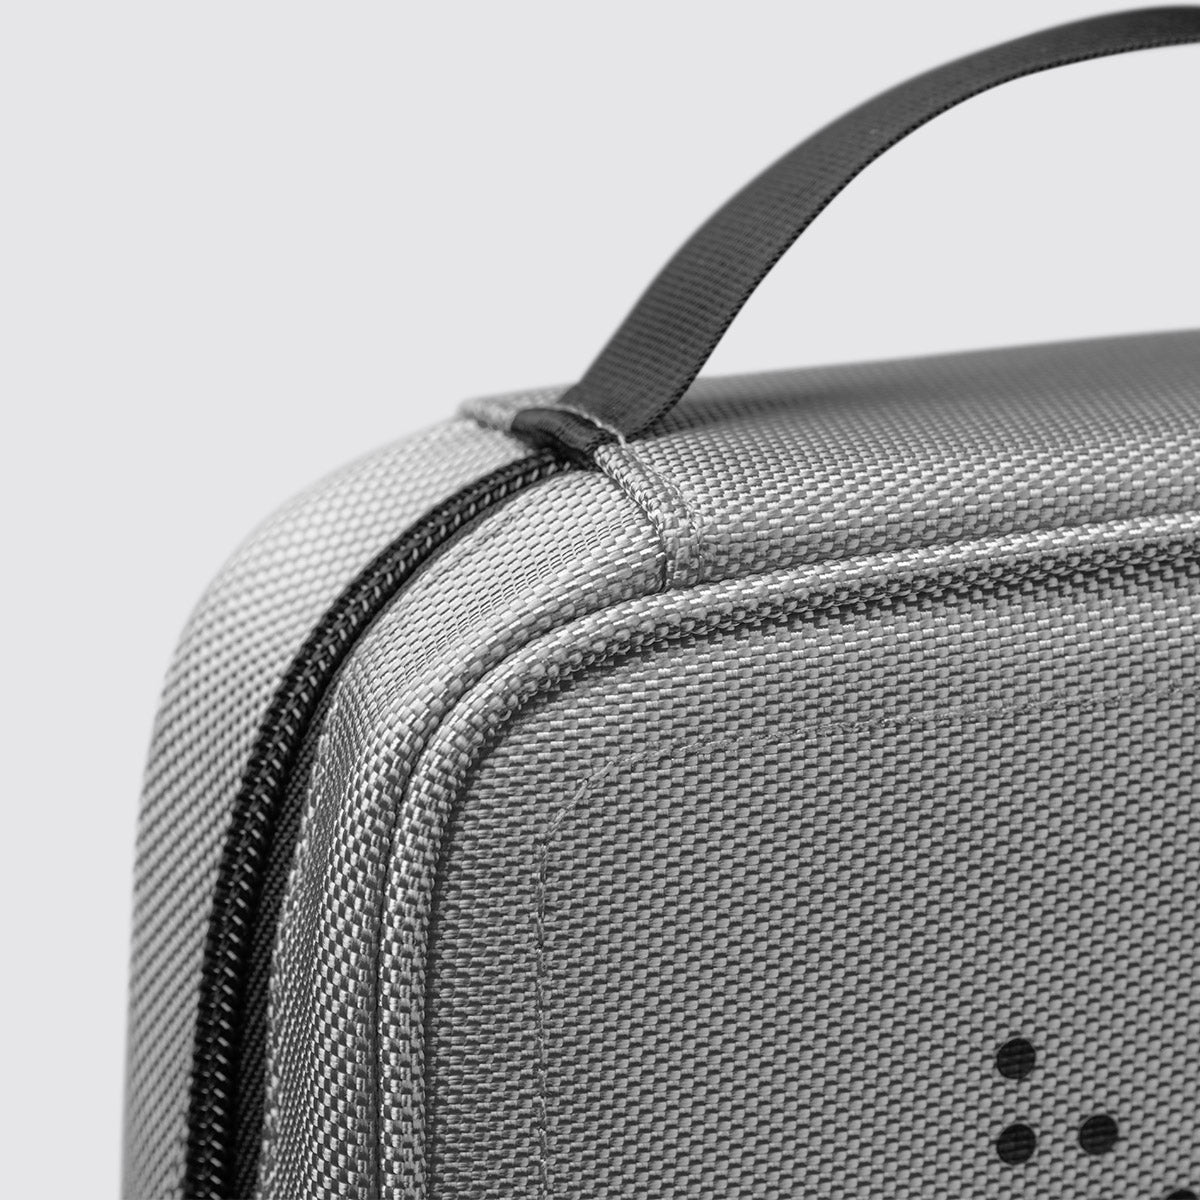 Tonie Carrying Case: Grey